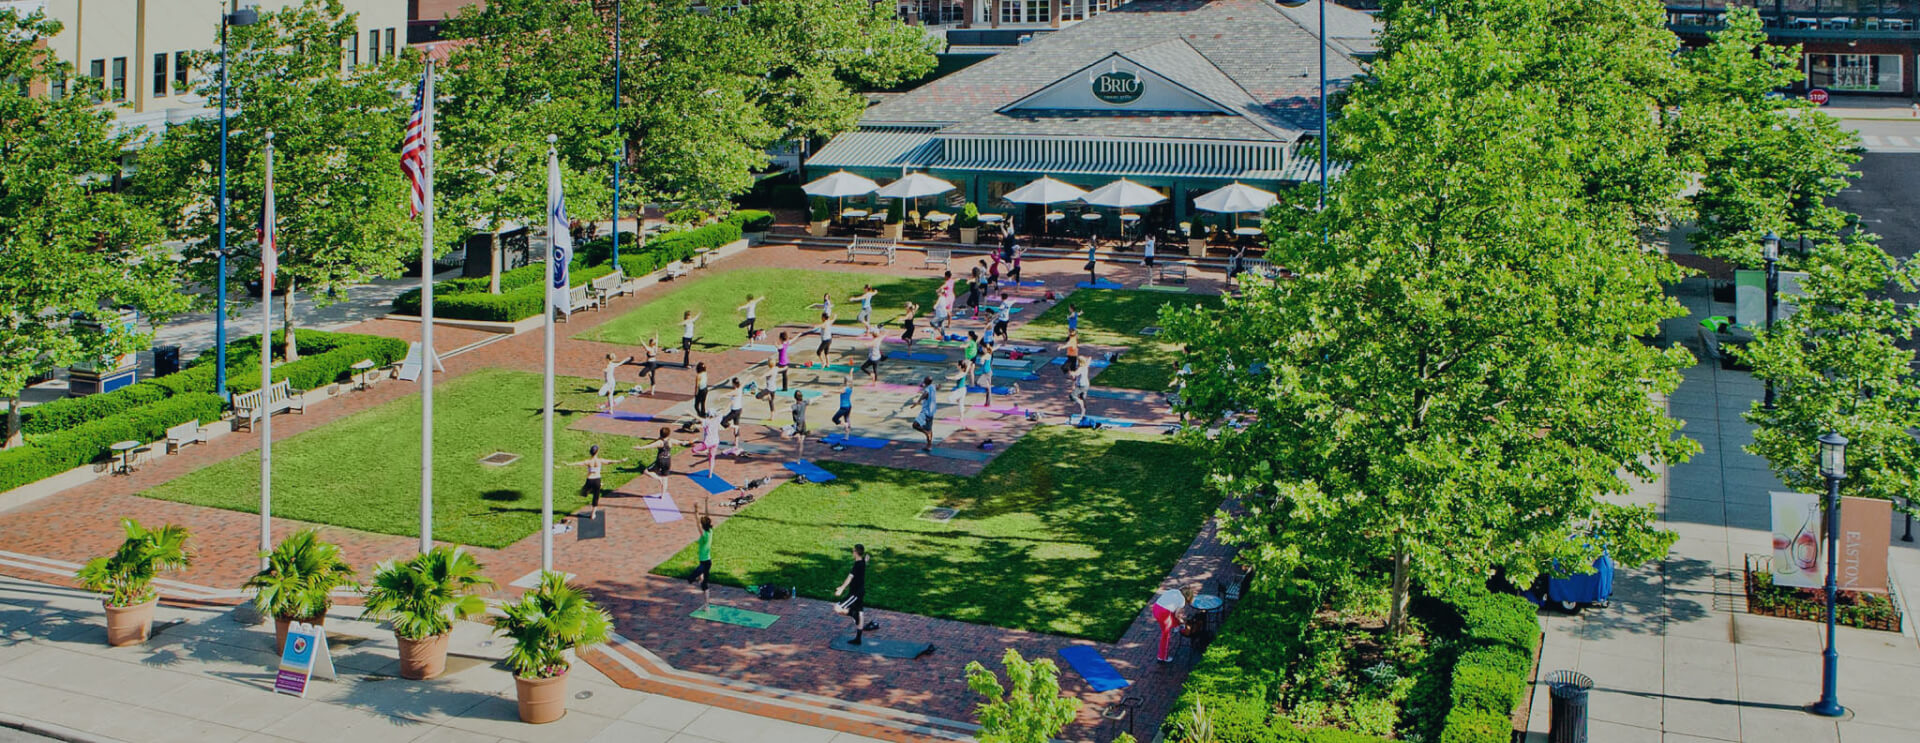 Overhead view of yoga on the lawn in front of Brio restaurant